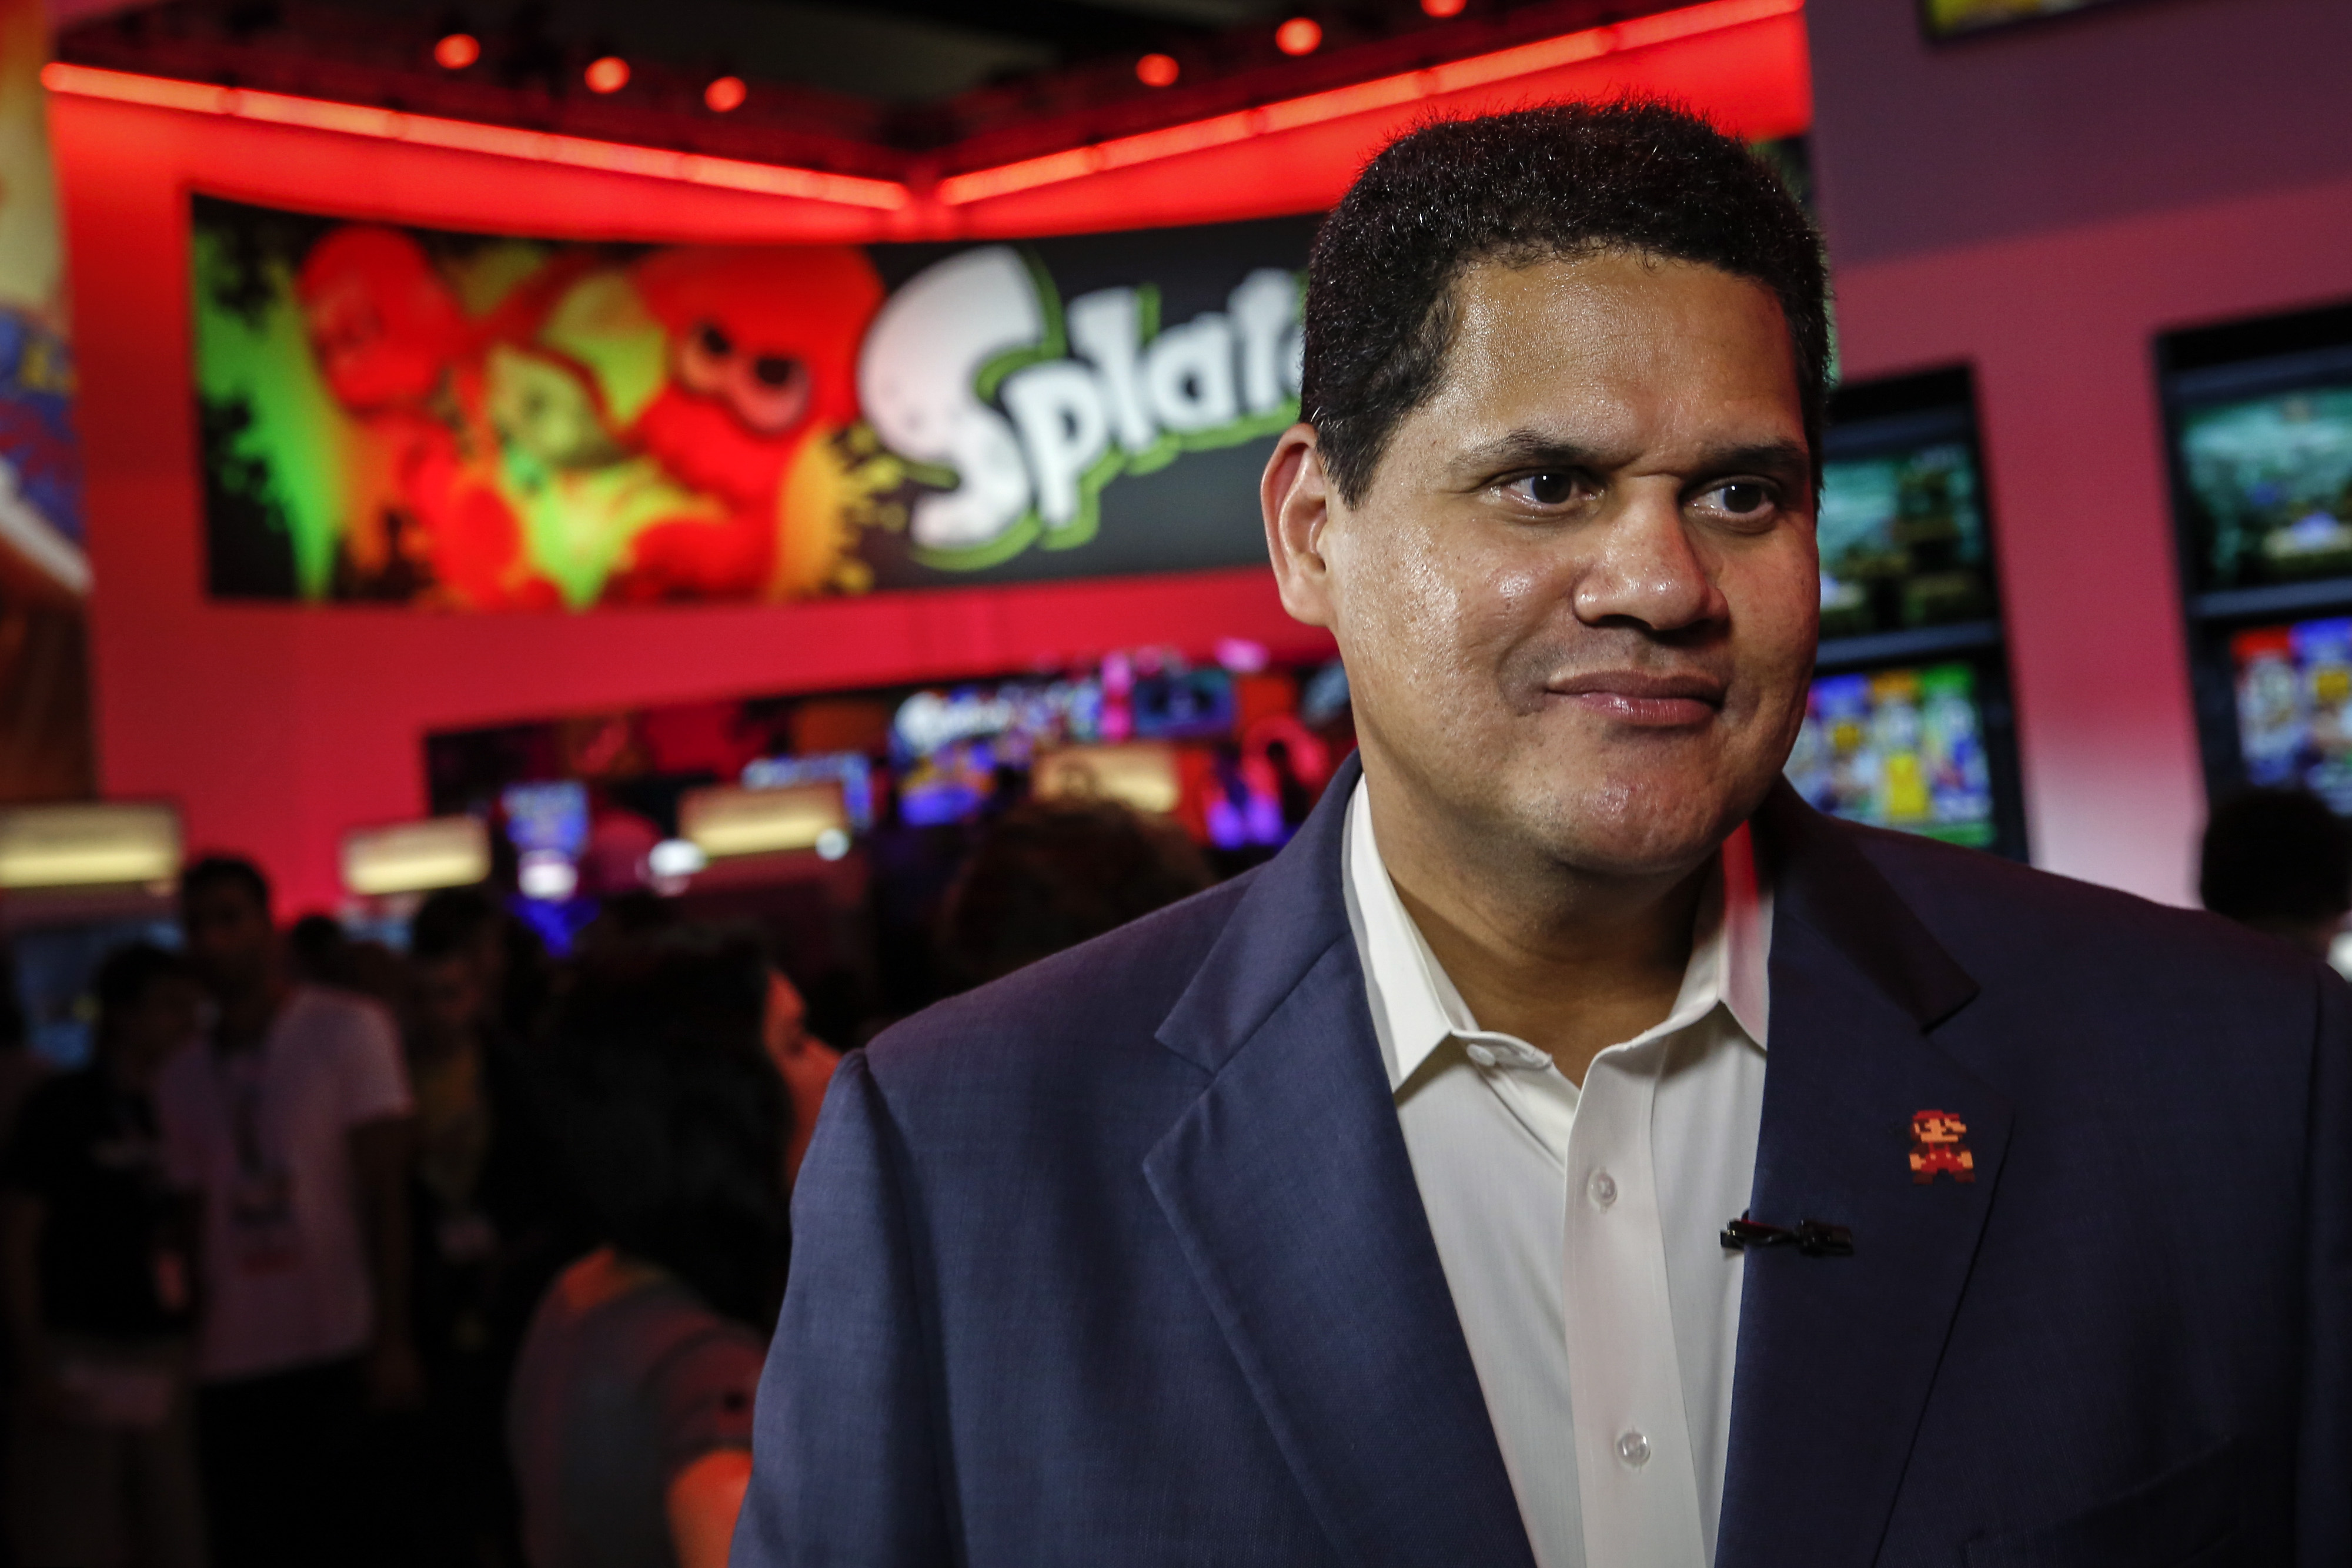 Reggie Fils-Aime, president and chief operating officer of Nintendo of America Inc., attends a Bloomberg Television interview at the E3 Electronic Entertainment Expo in Los Angeles on June 11, 2014. (Patrick T. Fallon–Bloomberg/Getty Images)